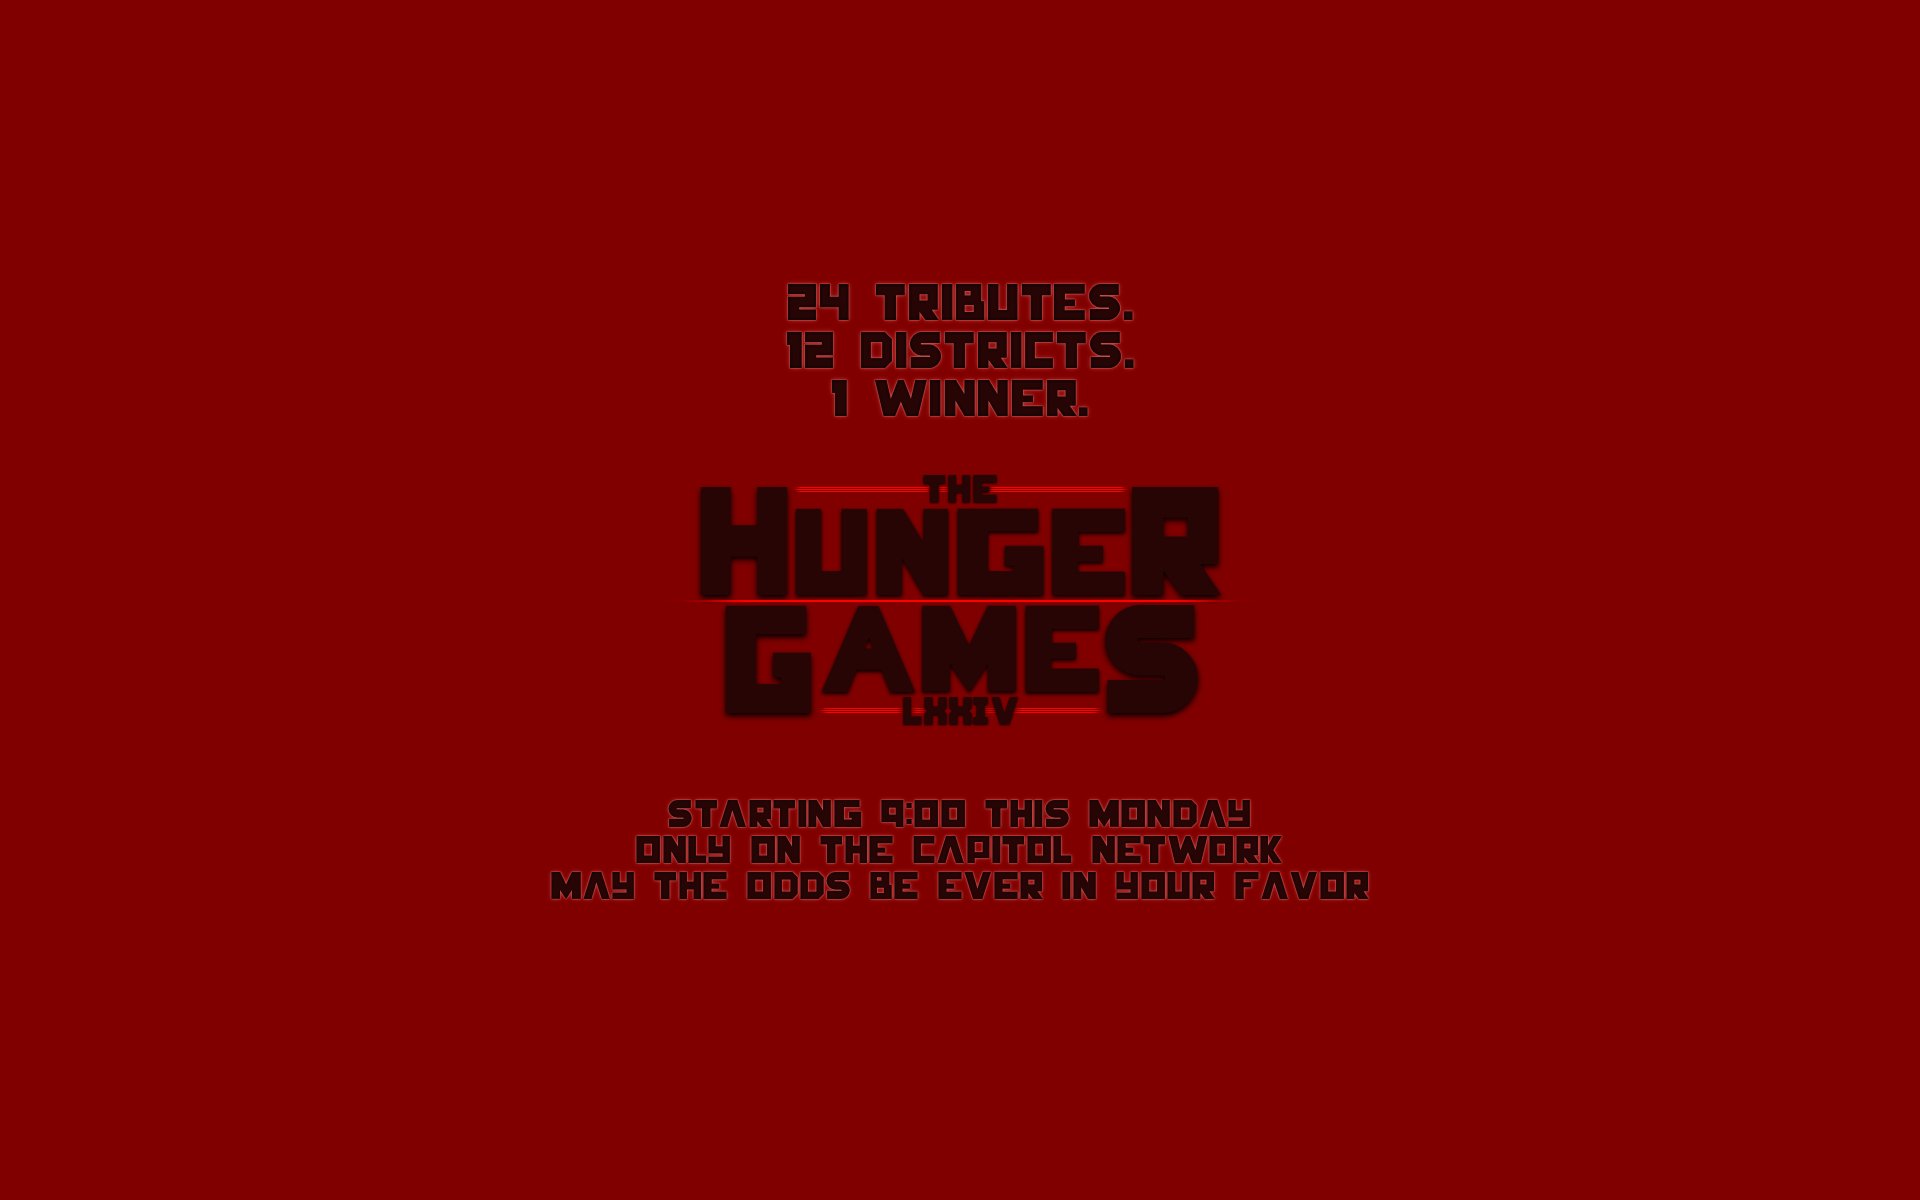 may the odds be ever in your favor wallpaper